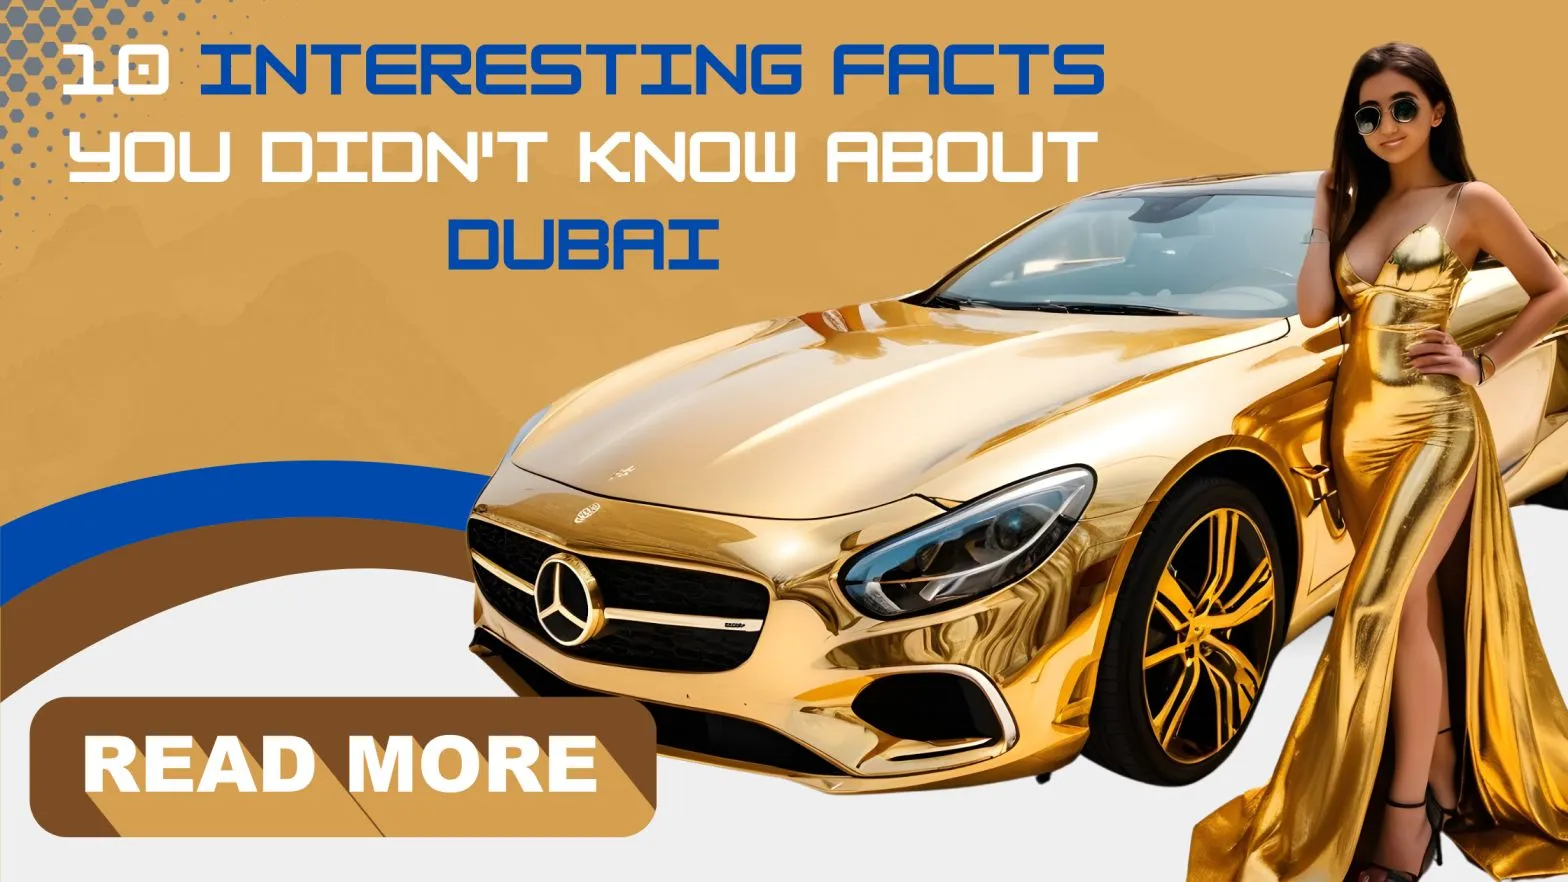 10 Interesting Facts You Didn't Know About Dubai